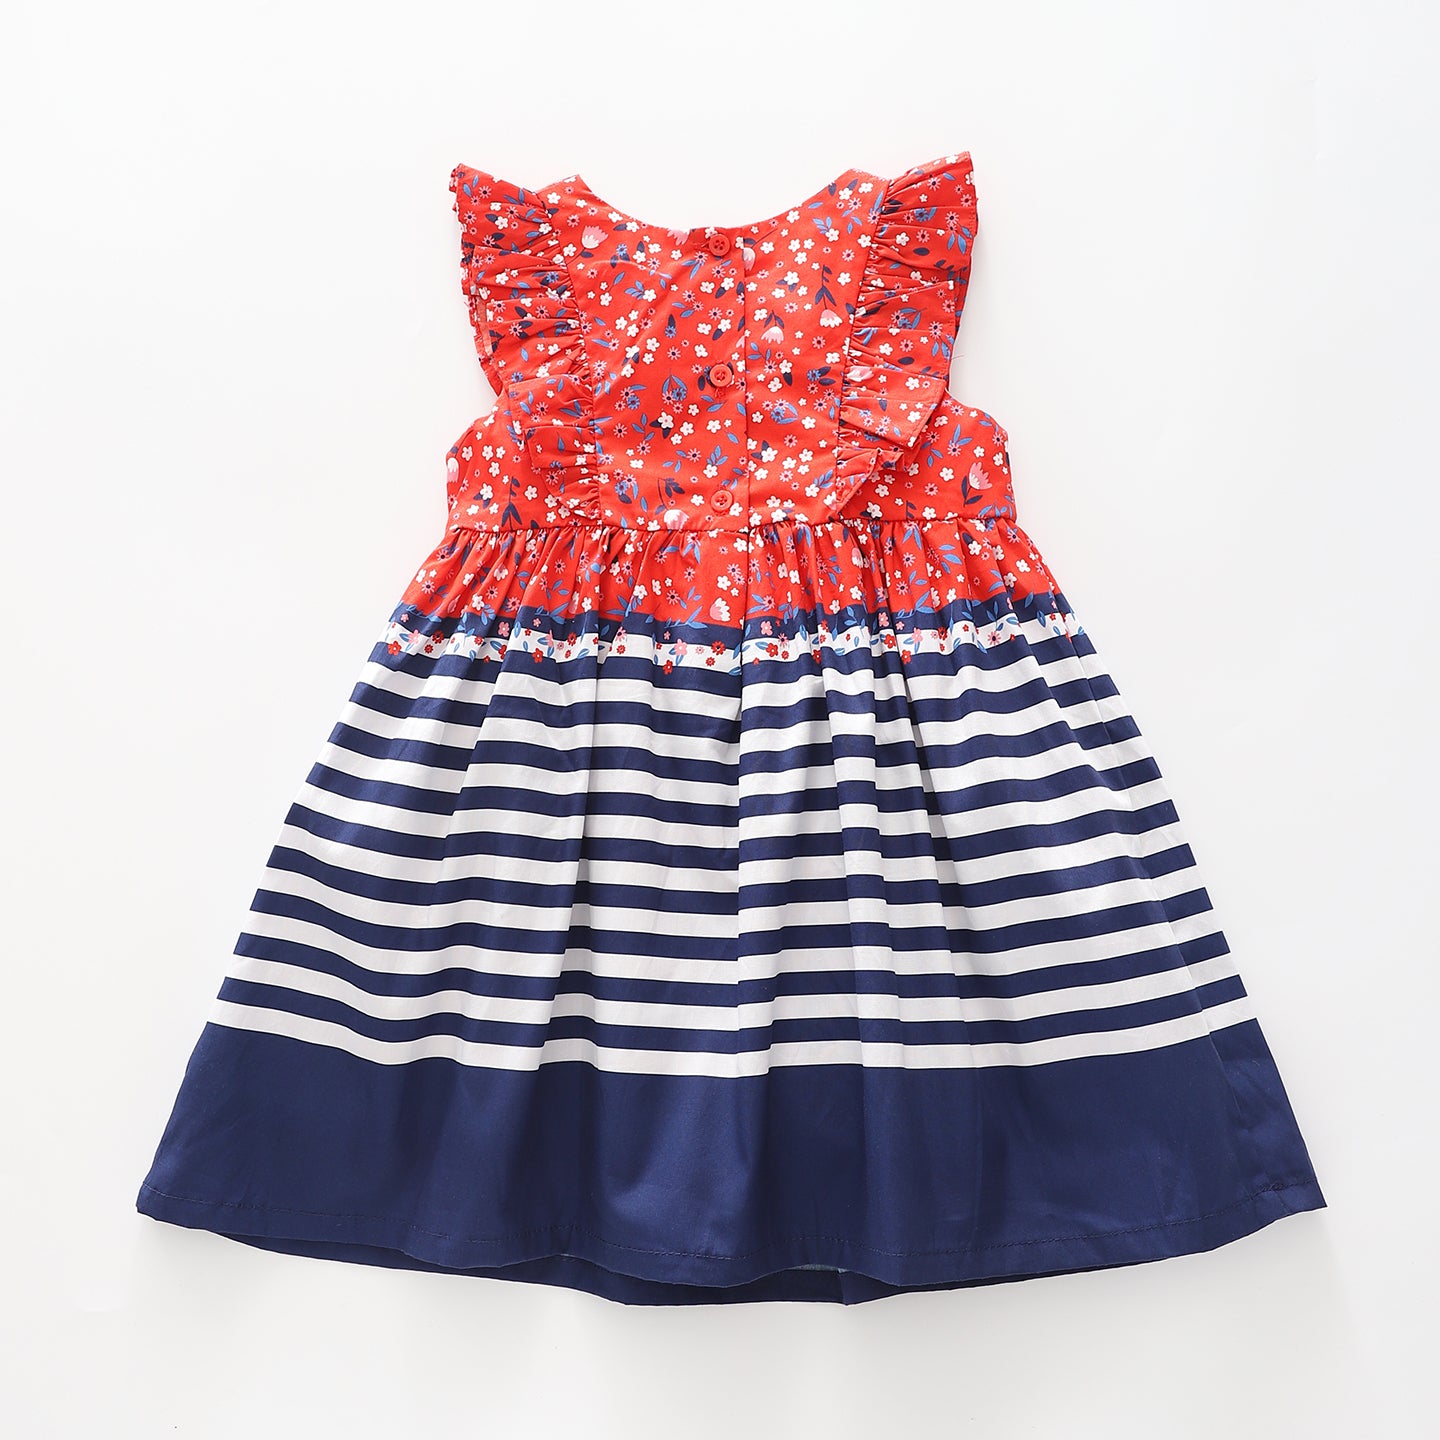 Girl's Red and Navy Blue Dress